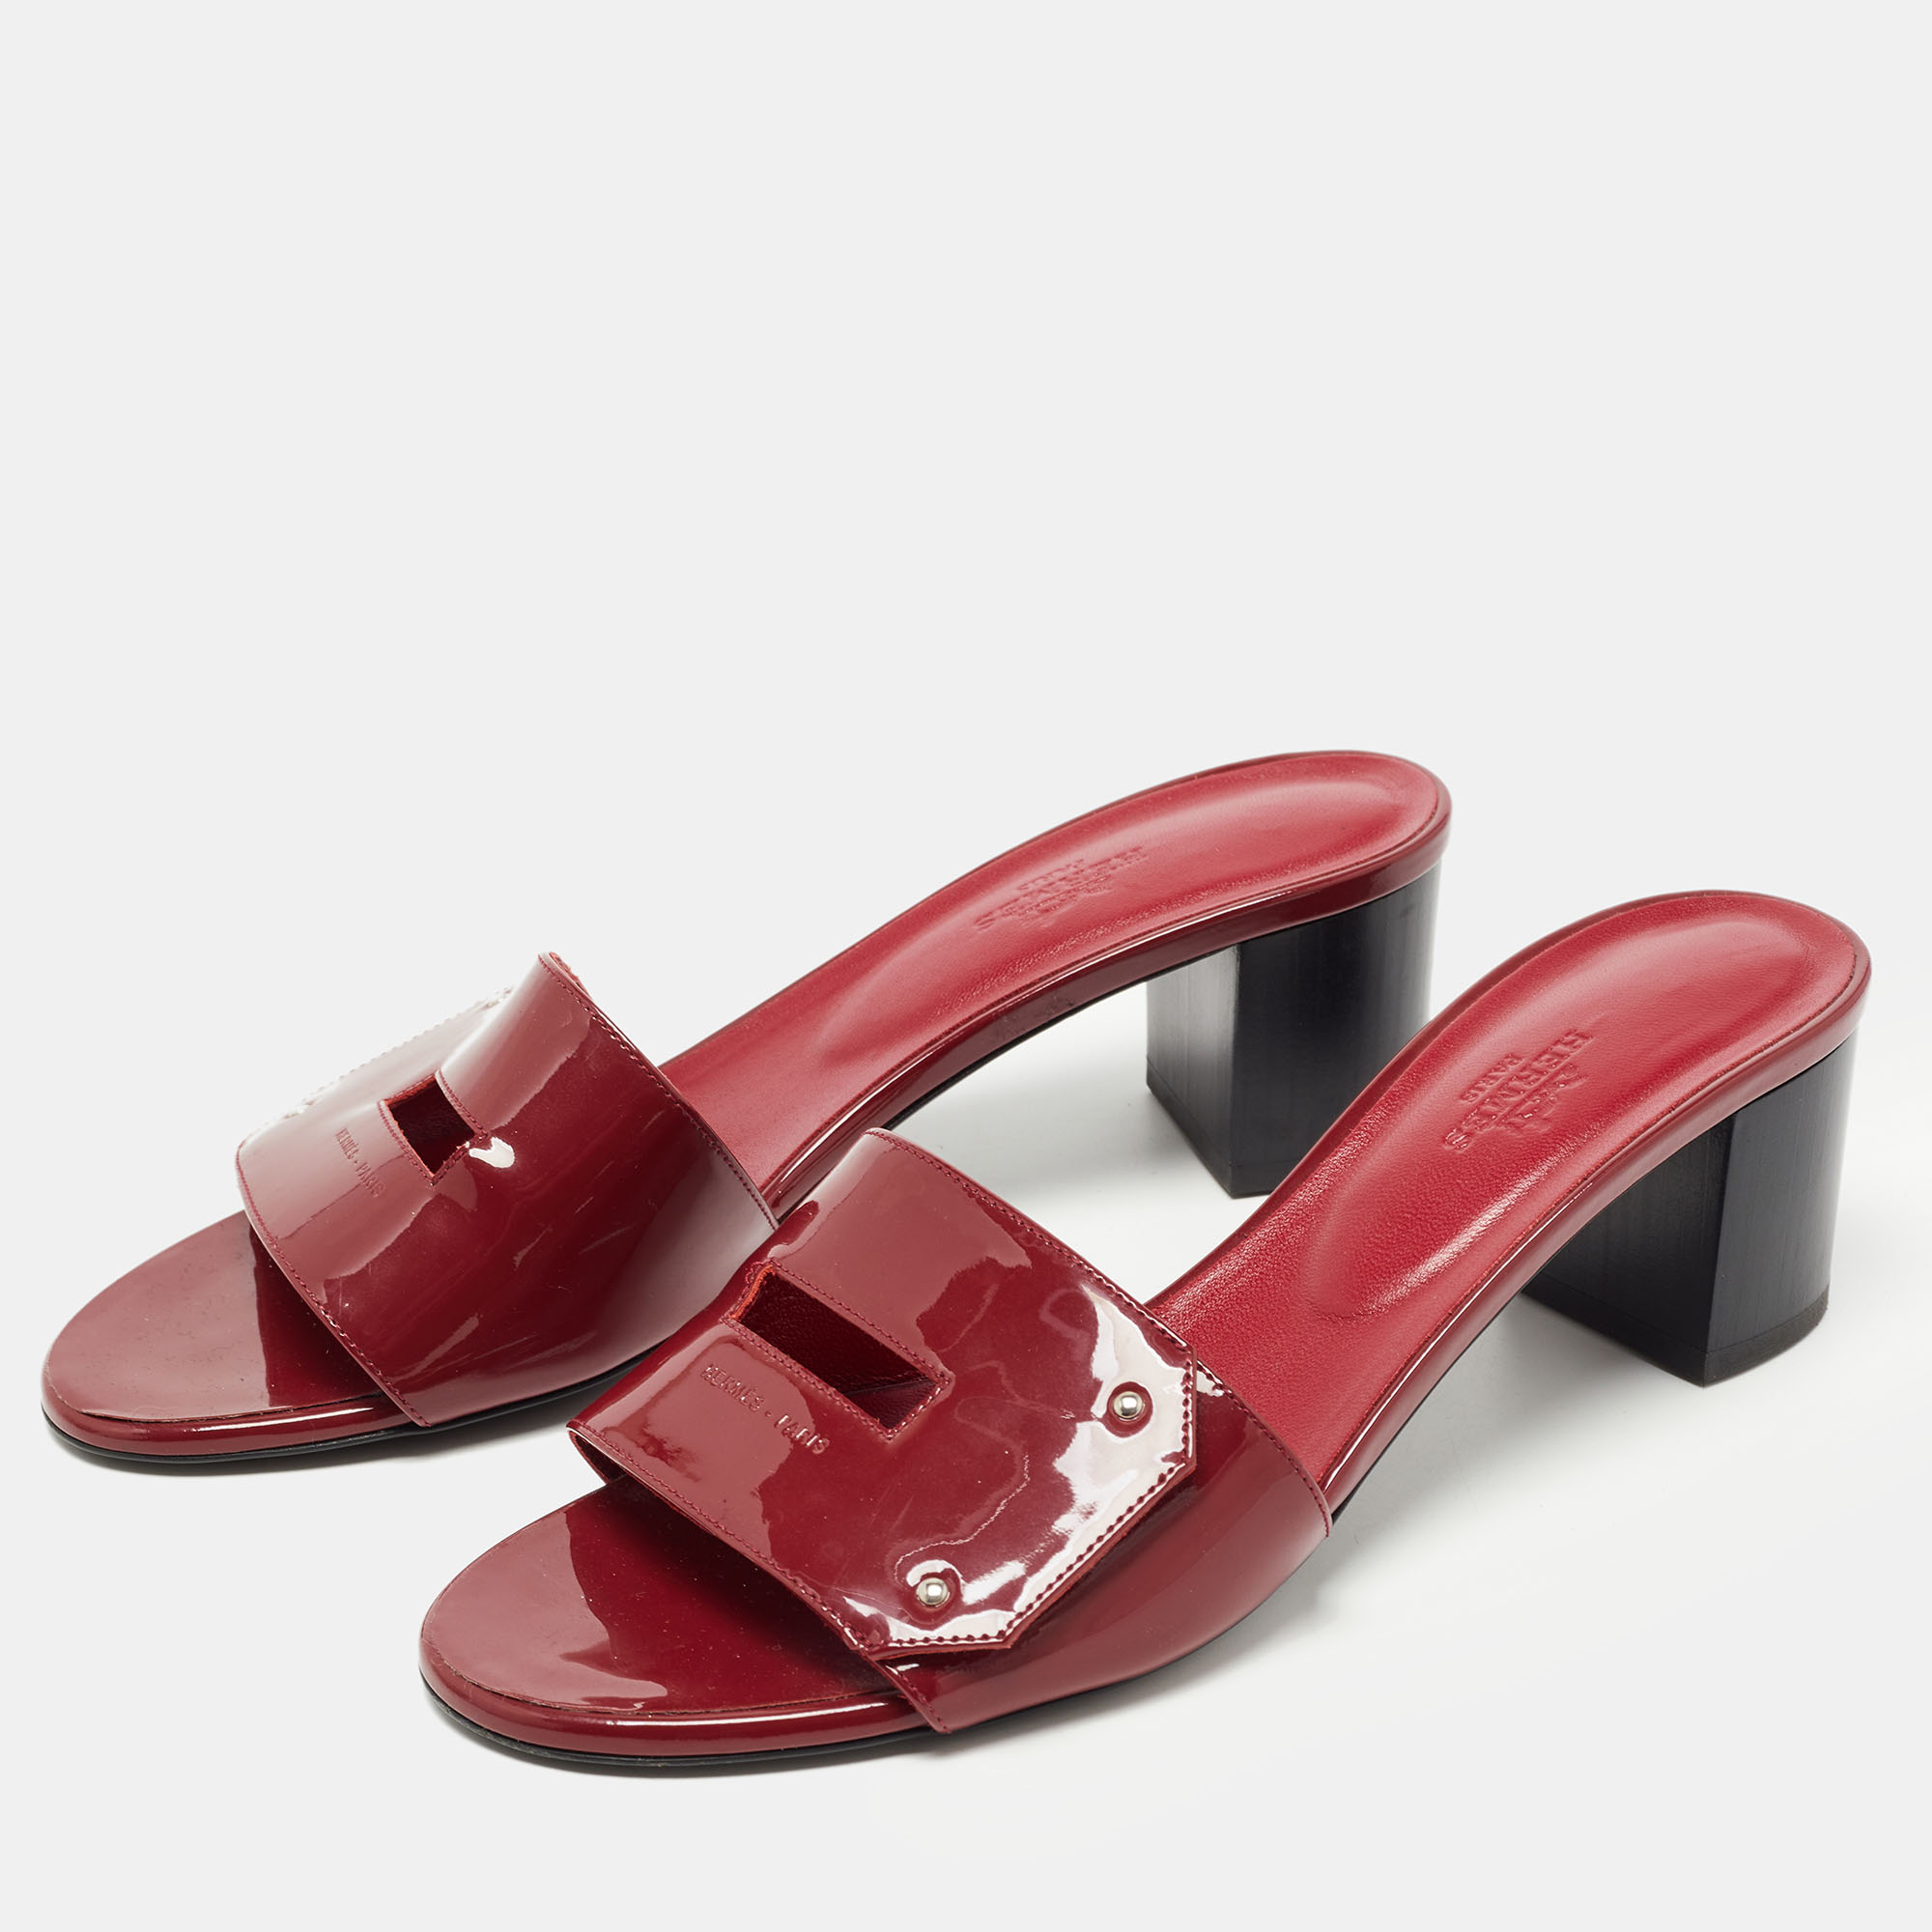 

Hermes Burgundy Patent Leather View Slide Sandals Size